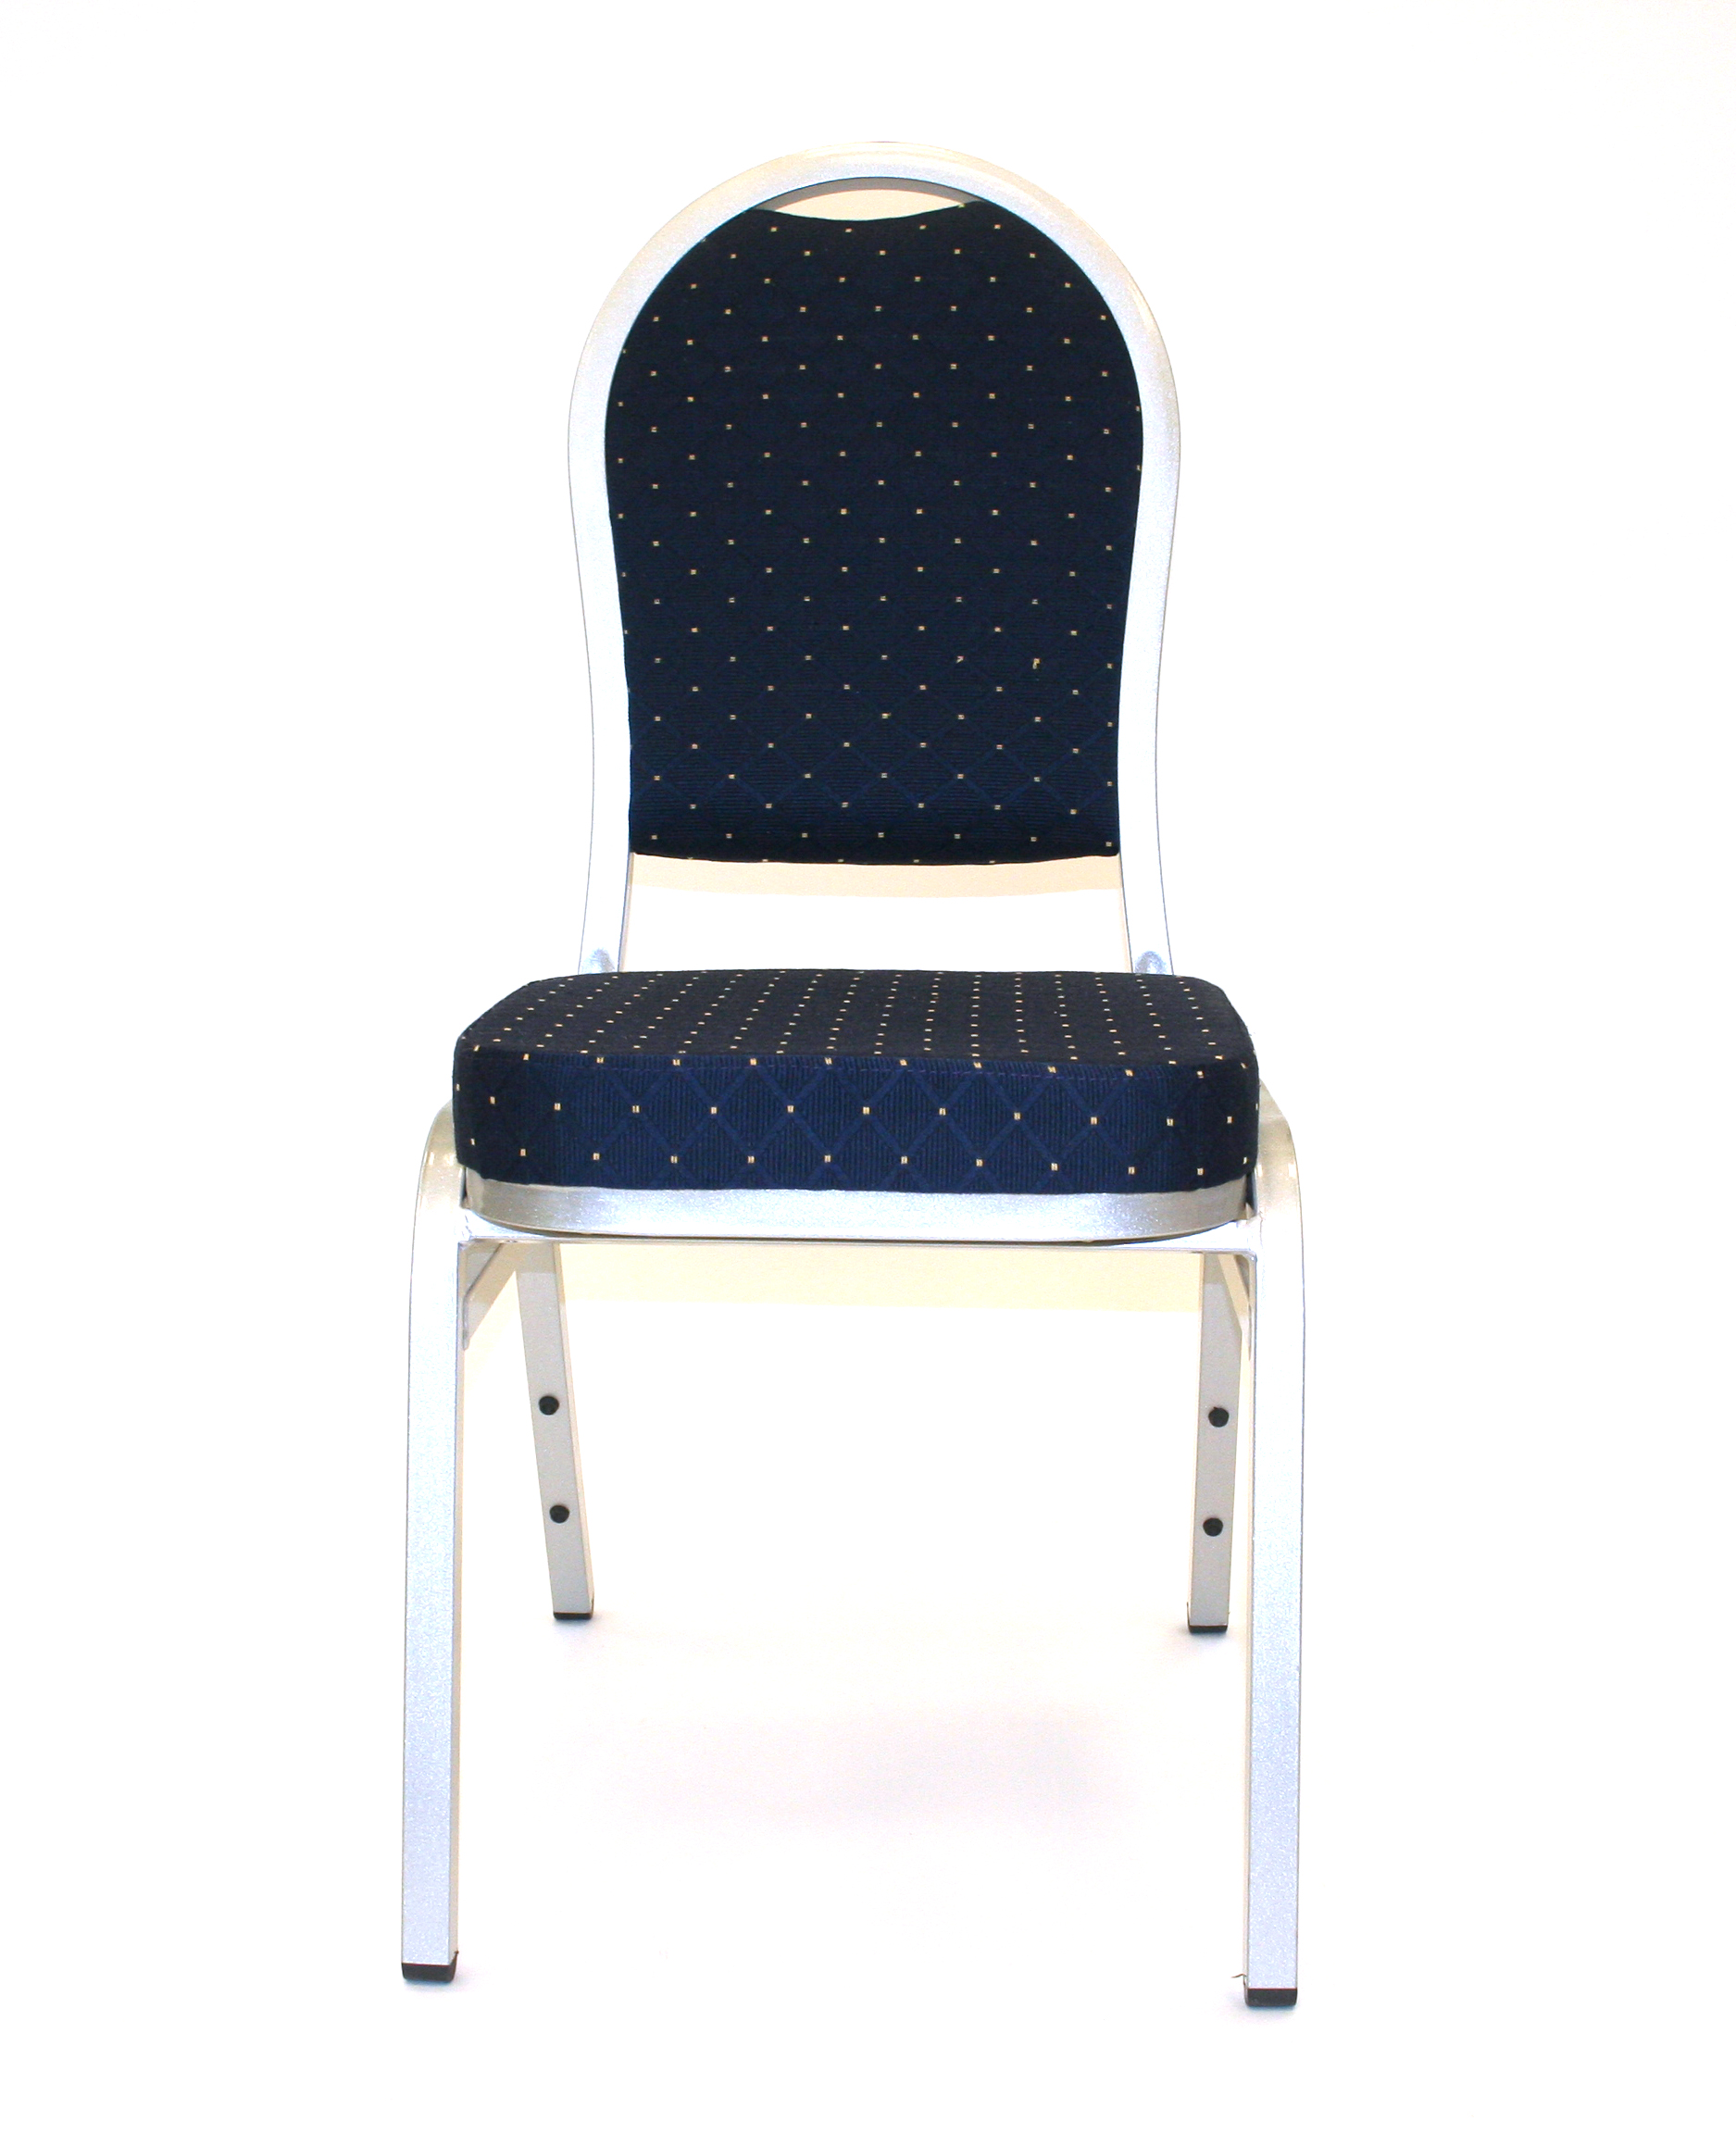 Blue & silver banquet conference chair - BE Event Hire